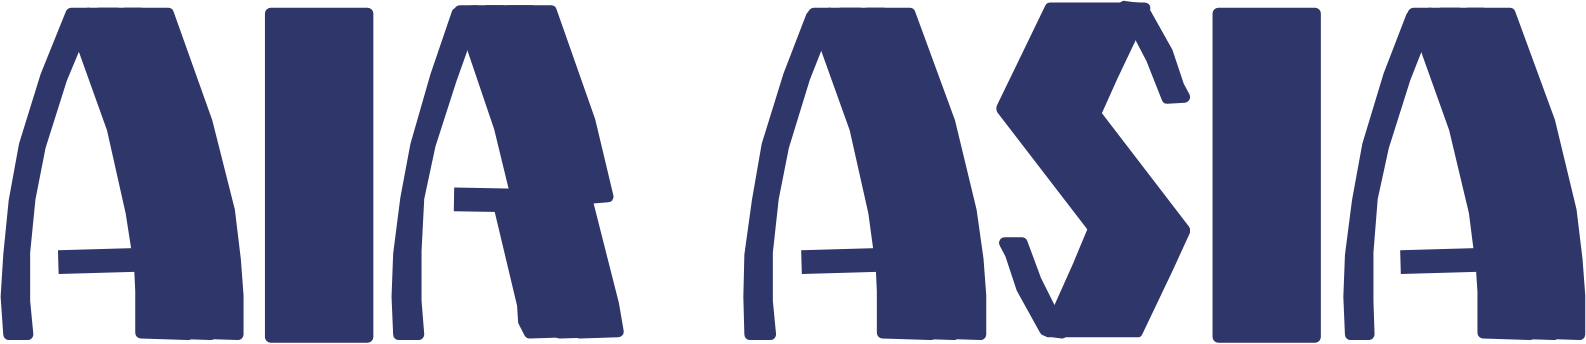 Air Asia Company Limited (AACL) logo large (transparent PNG)